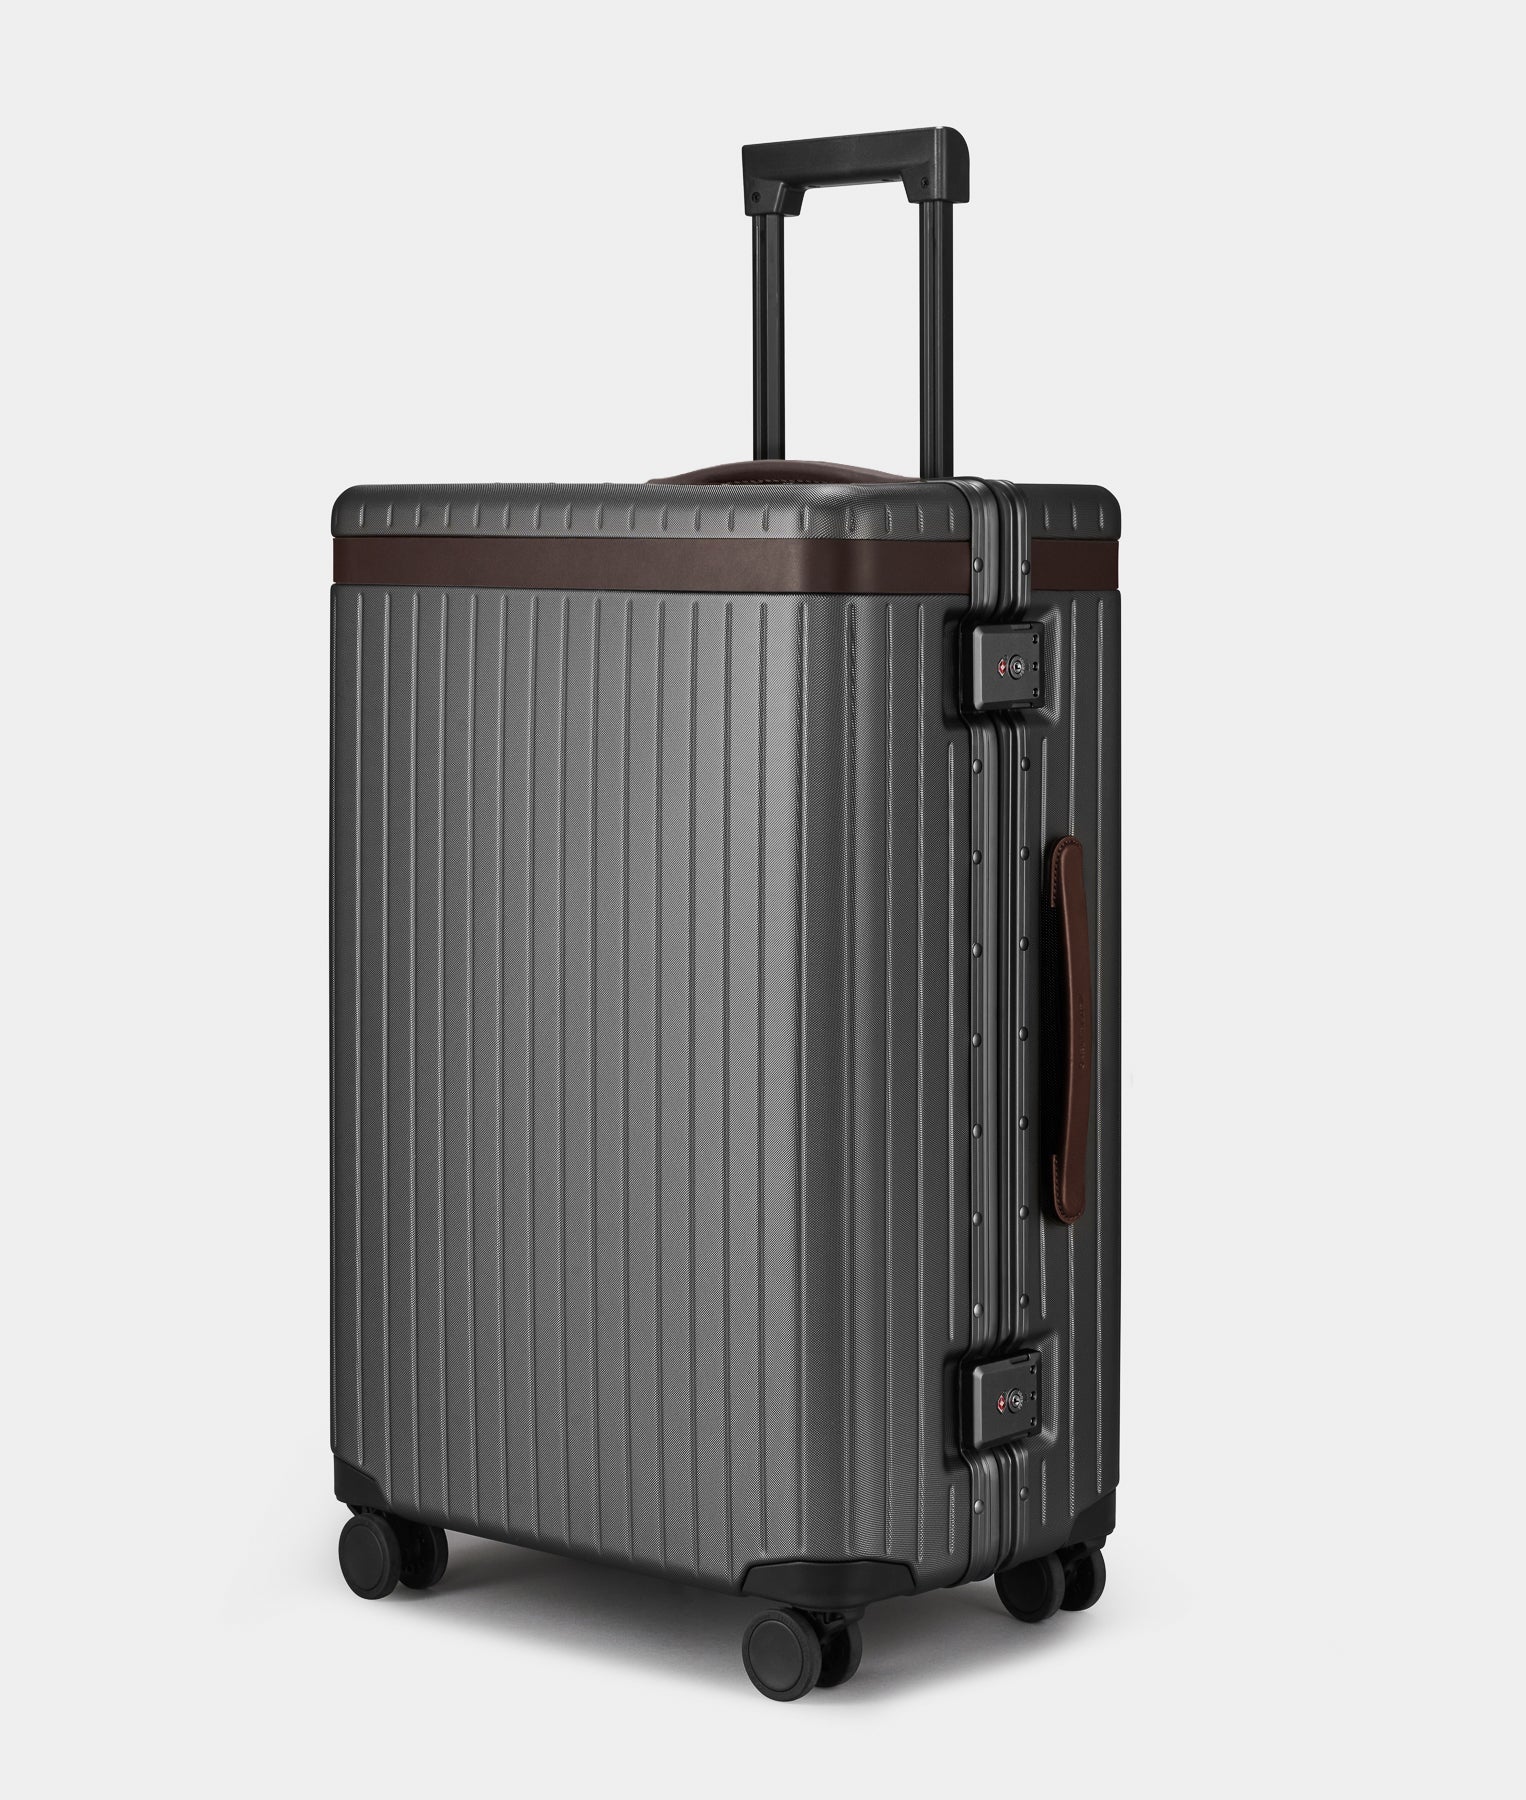 The Check-in - Return Grey Chocolate / Dotted Large grey polycarbonate suitcase - Fair Condition